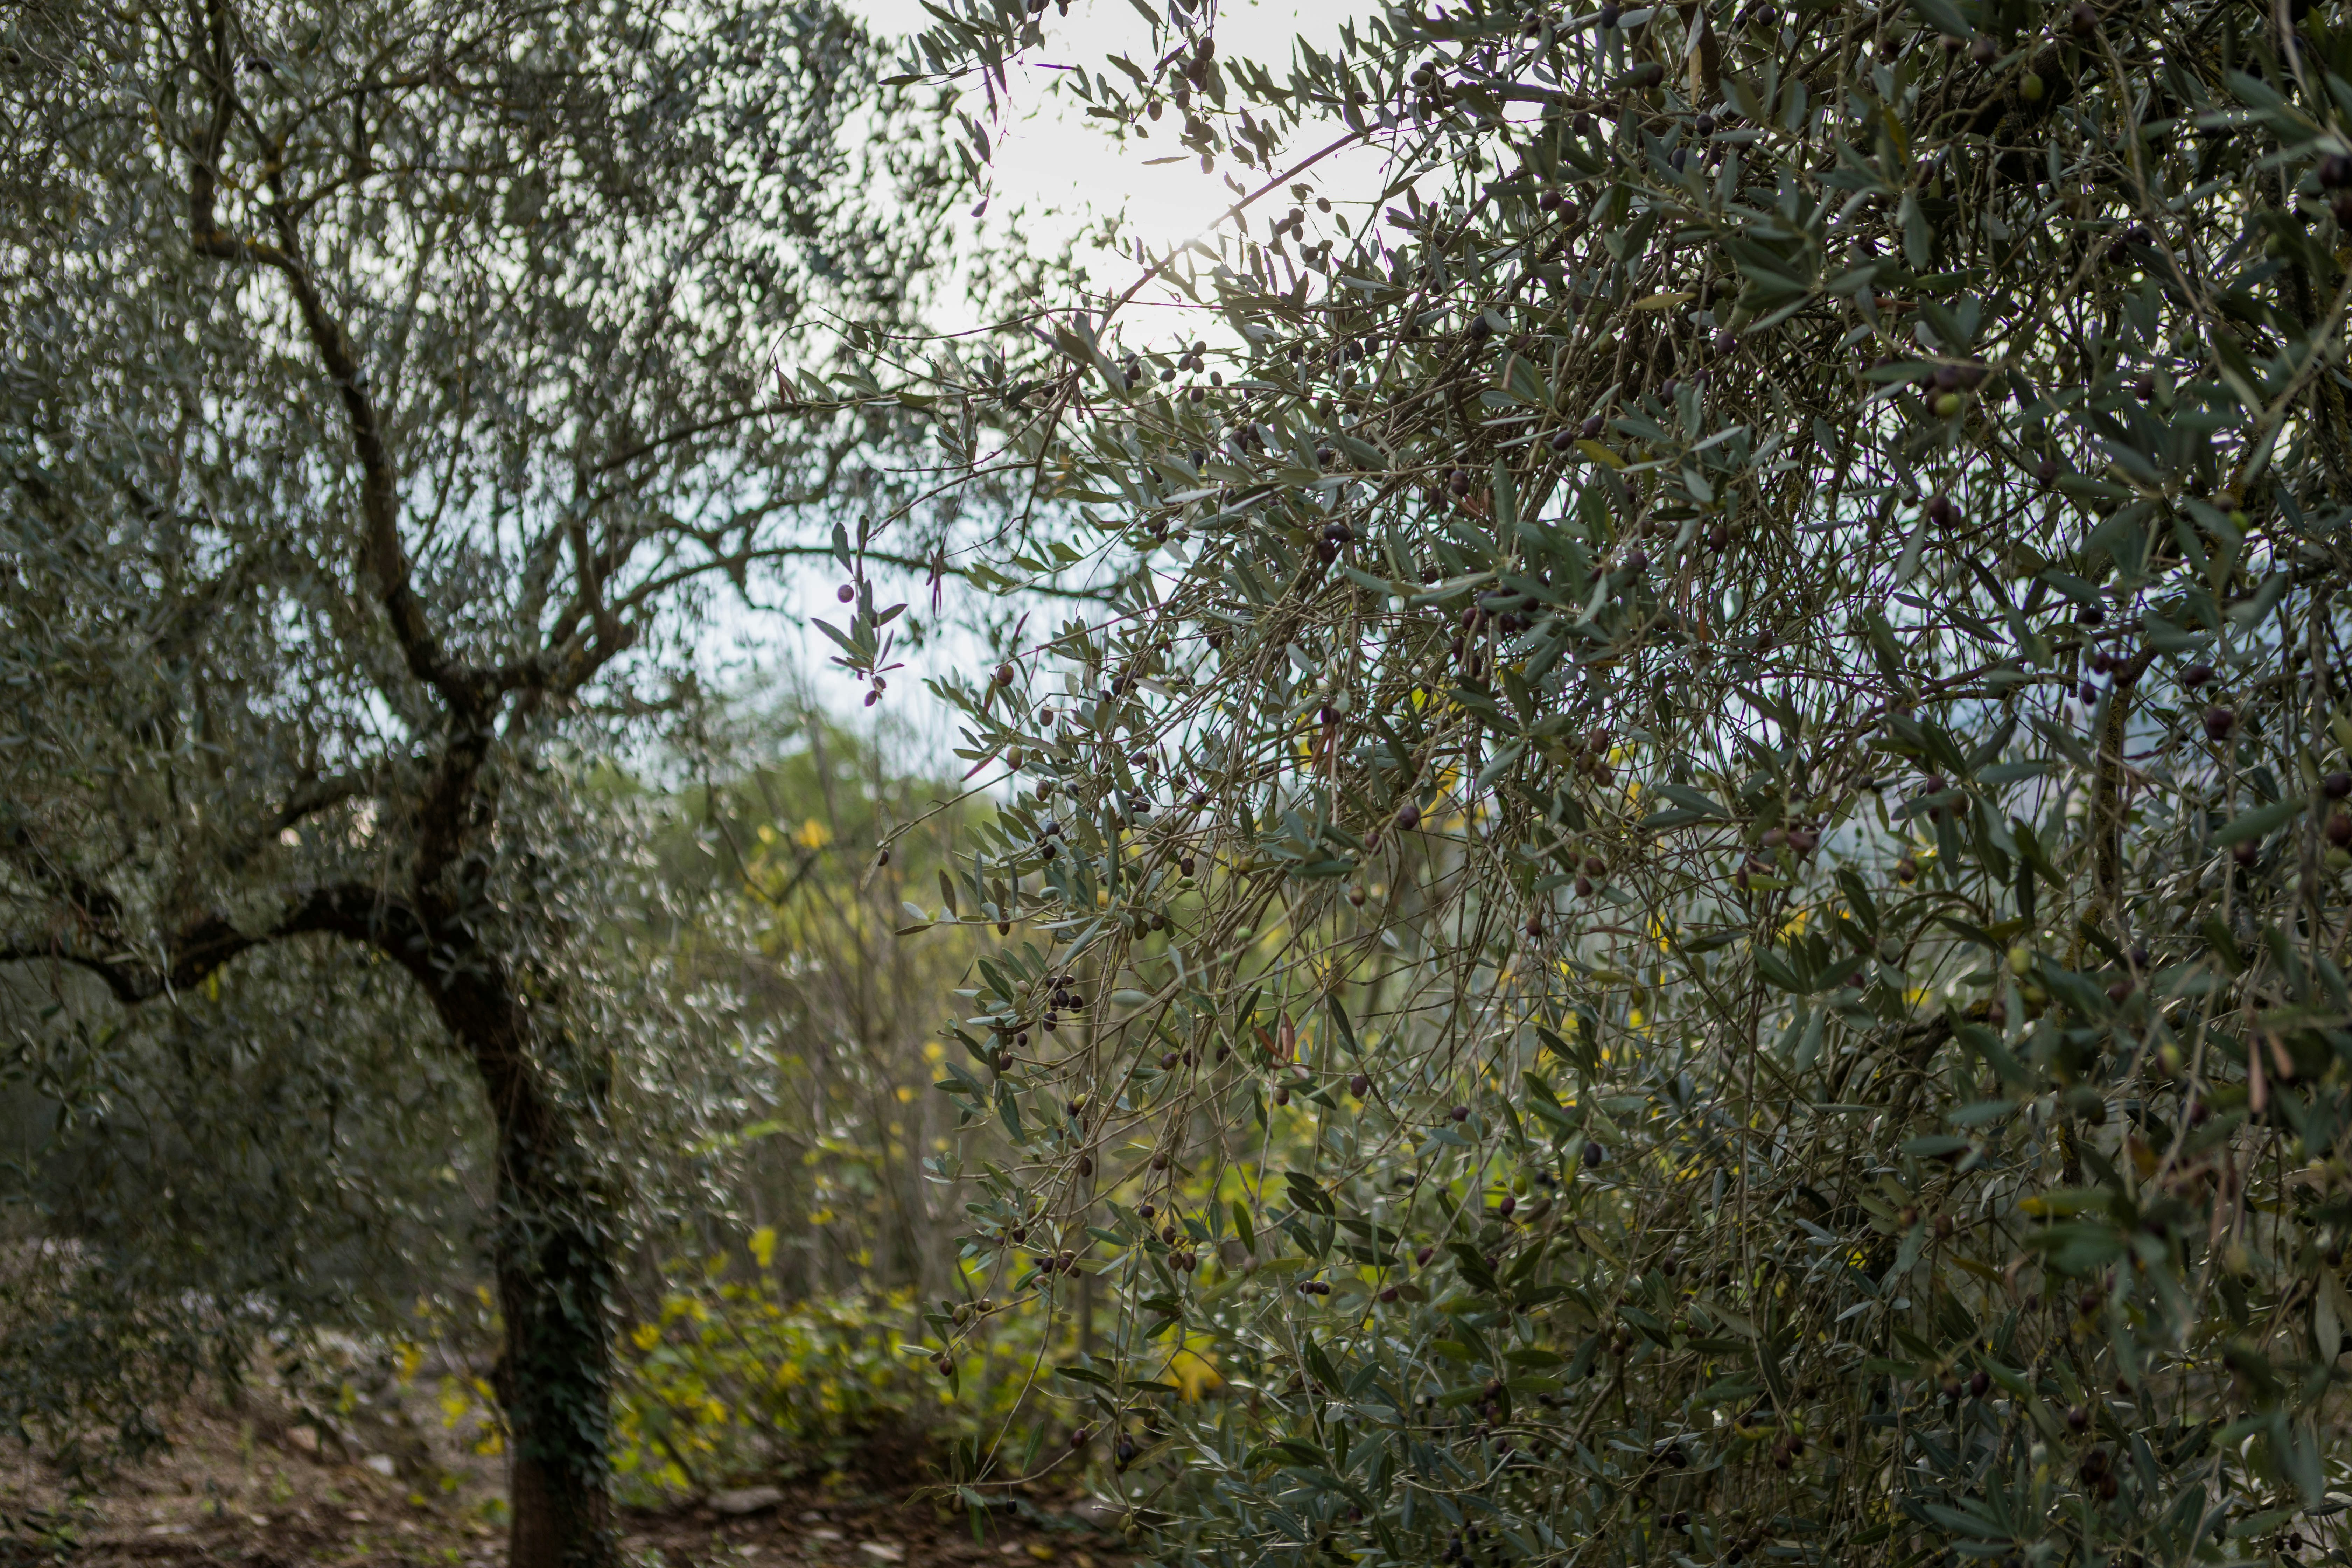 An olive grove in Pico, Italy is dense with green leaves, black trunks and branches, and pops of bright green new growth, all punctuated by the small, dark olives themselves